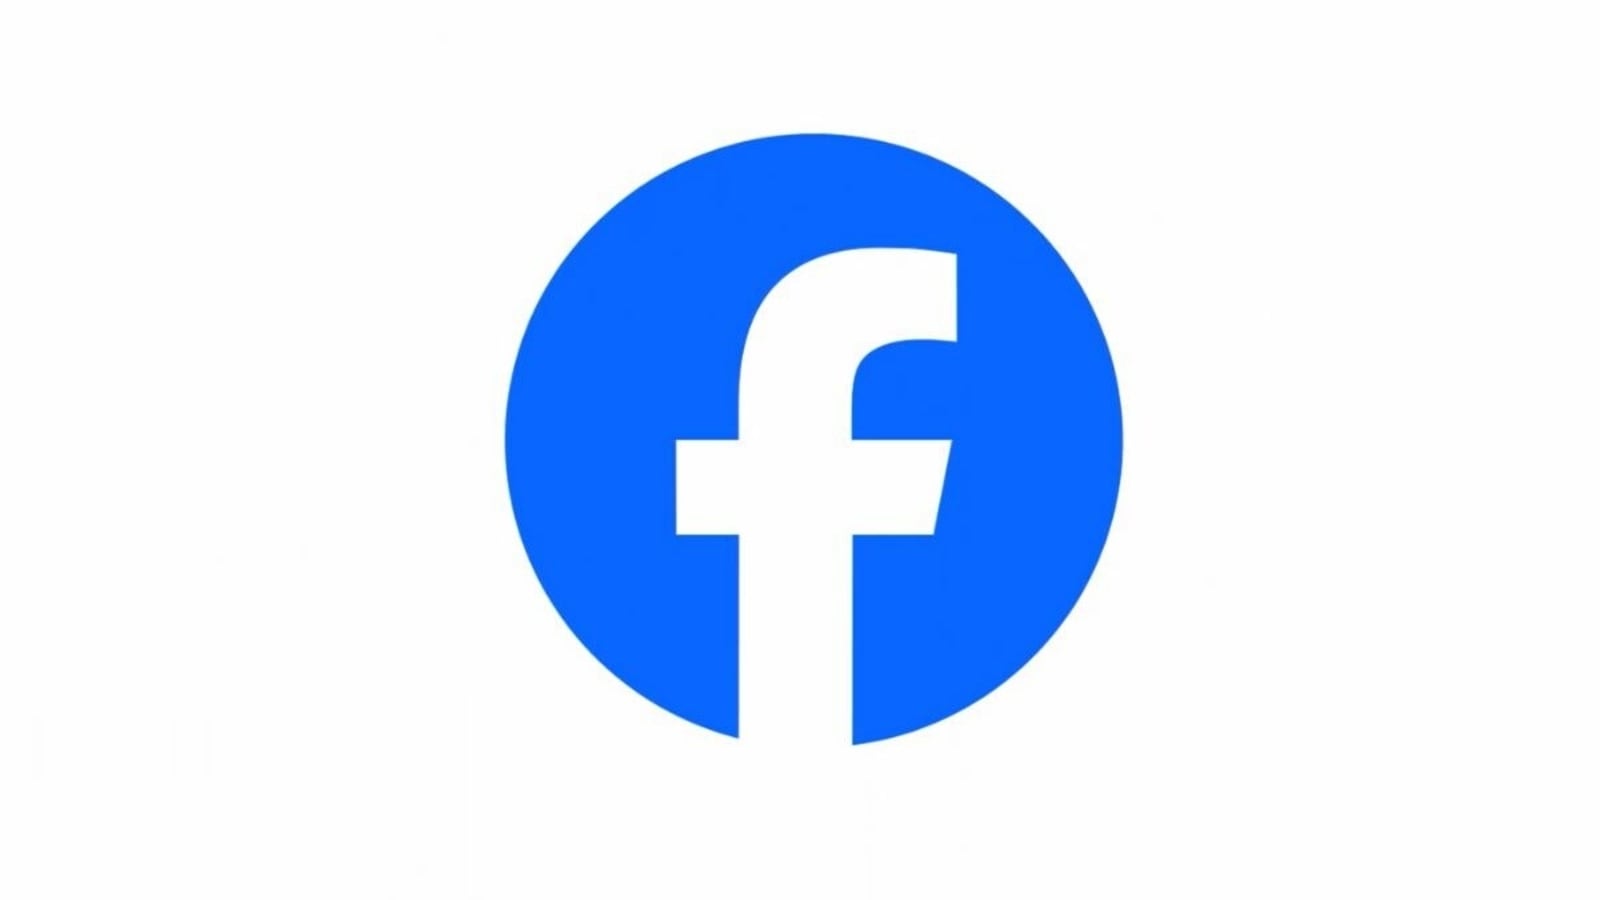 Did Facebook really change its logo? See if you can spot the difference | Tech News